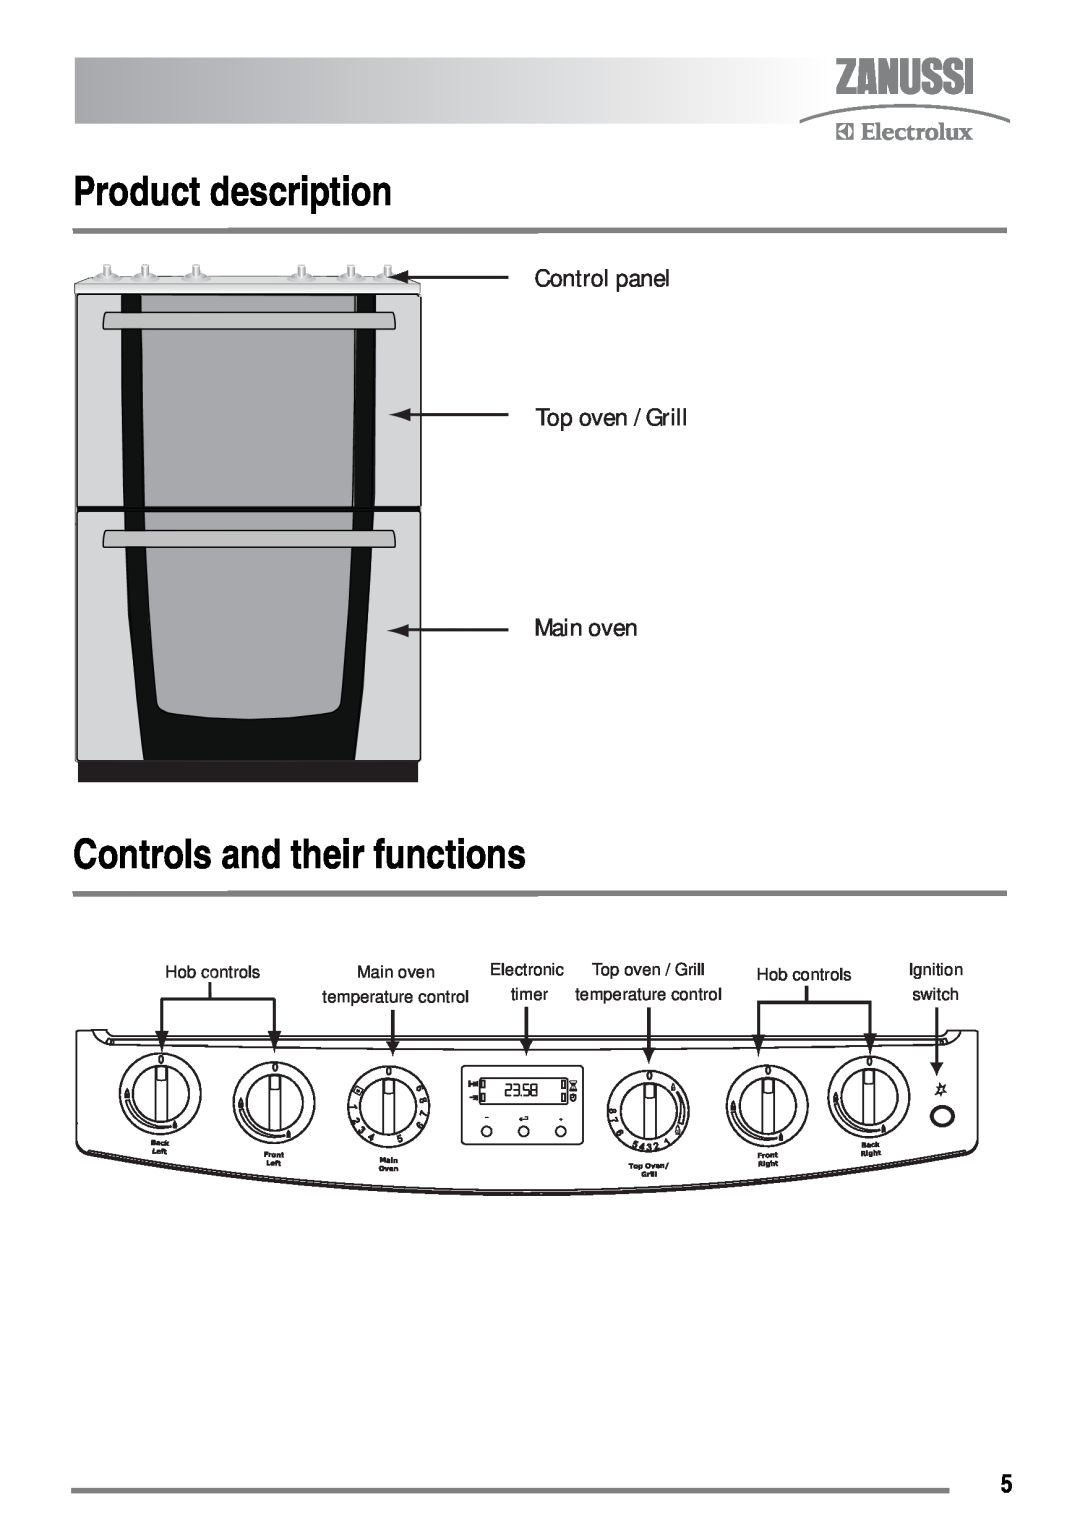 Zanussi FH10 Product description, Controls and their functions, Control panel Top oven / Grill Main oven, timer, switch 